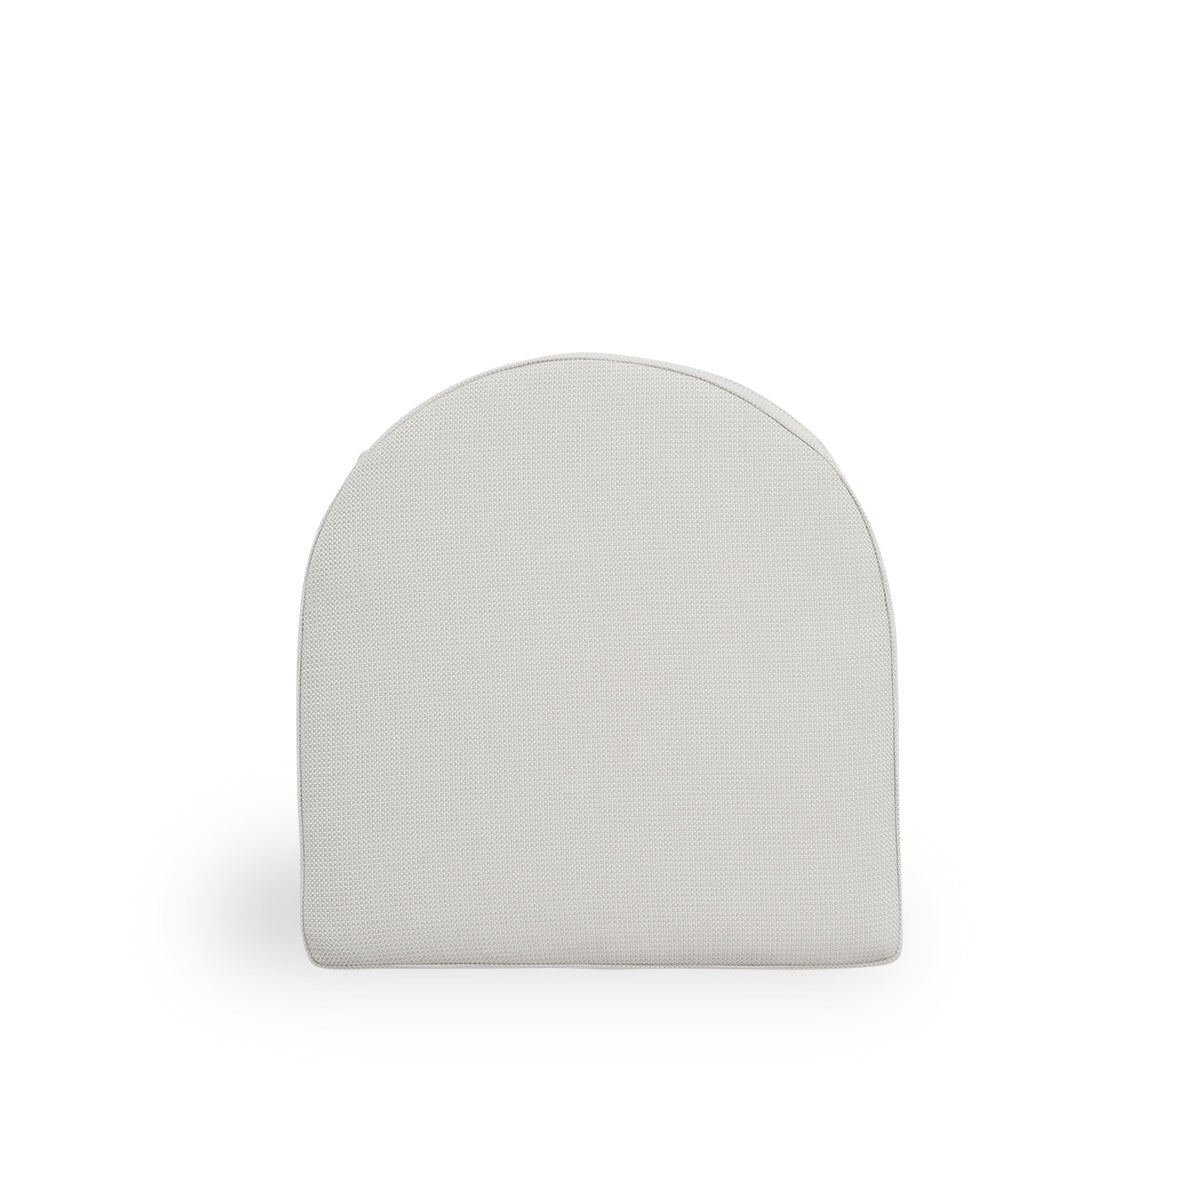 Emma Exterior Chair | Seat cushion by Sika